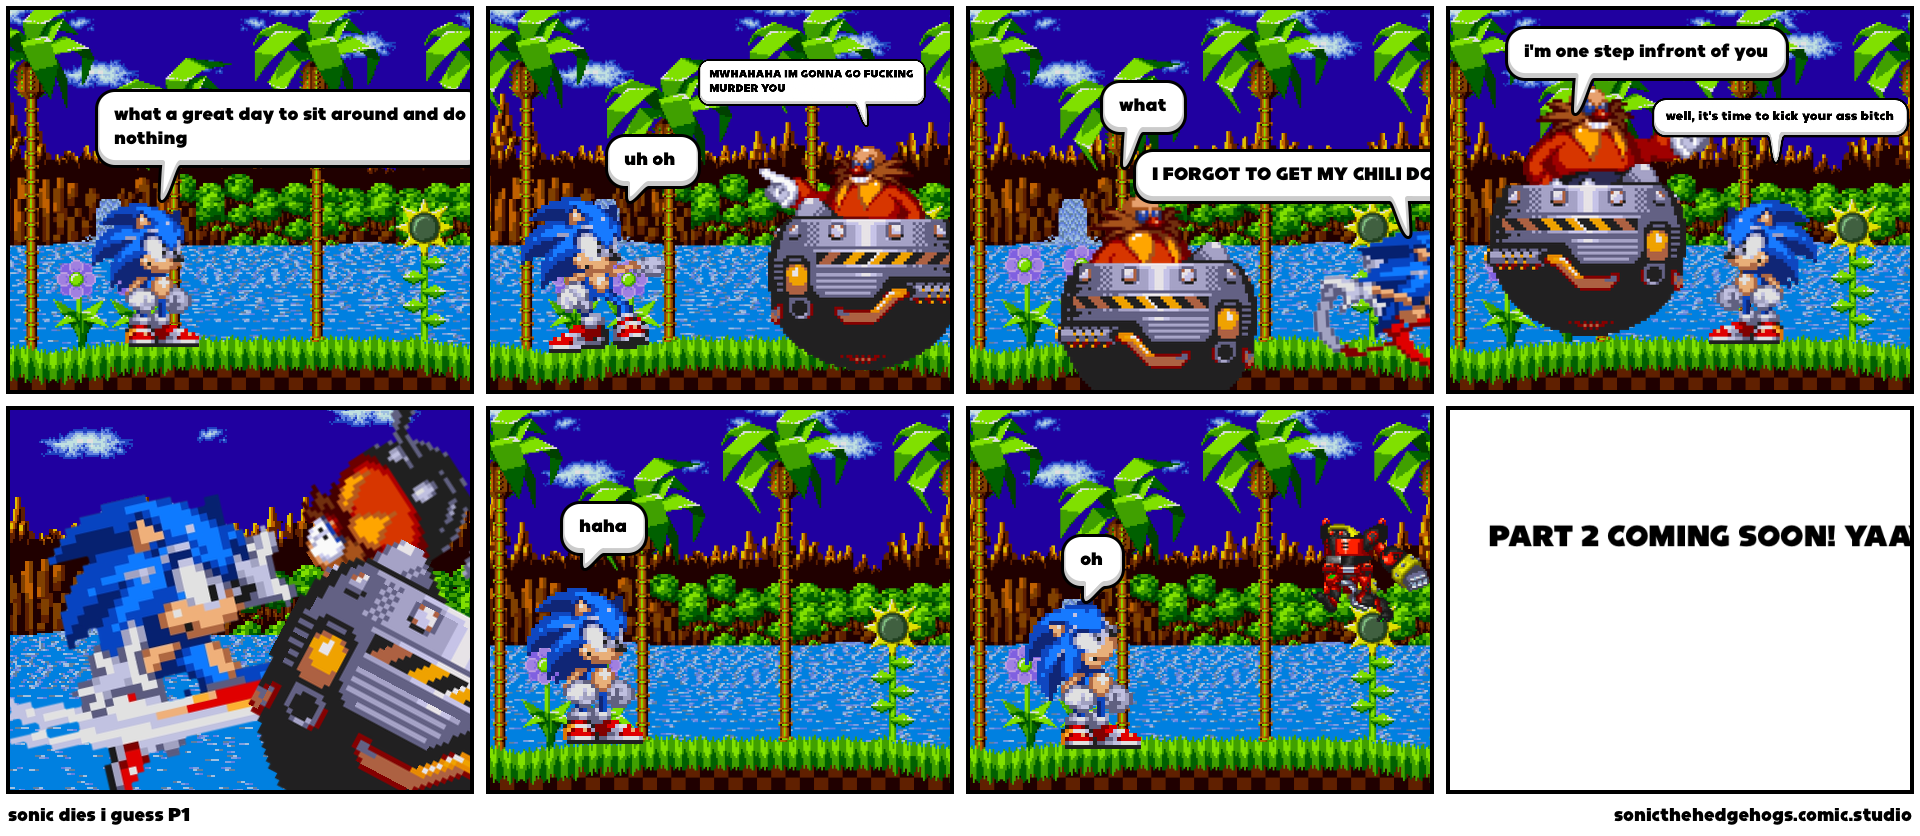 sonic dies i guess P1